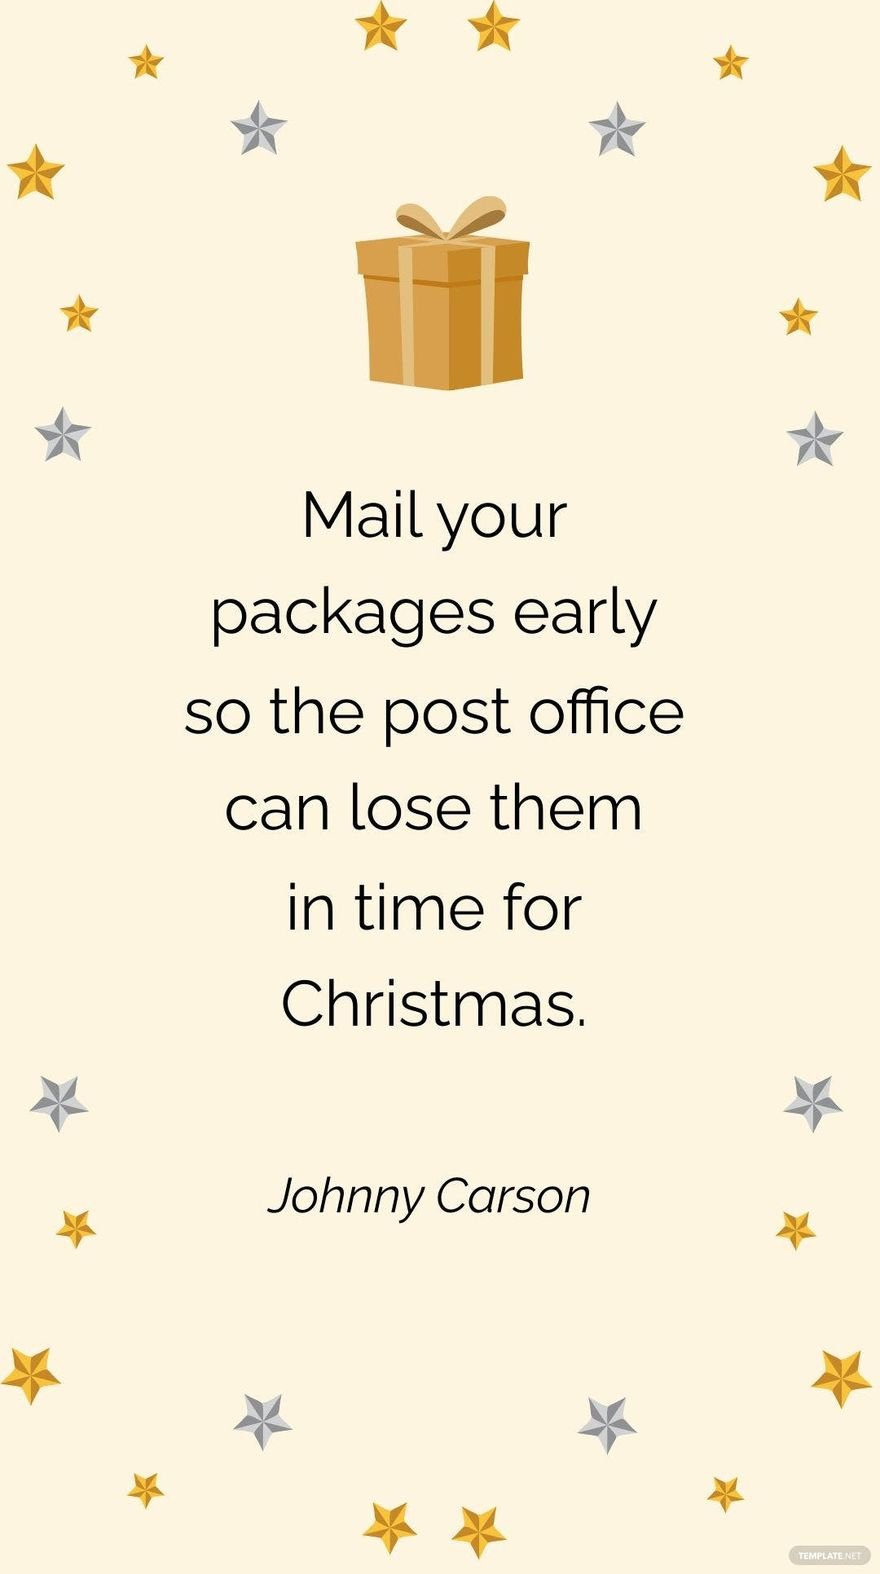 Johnny Carson - Mail your packages early so the post office can lose them in time for Christmas. in JPG